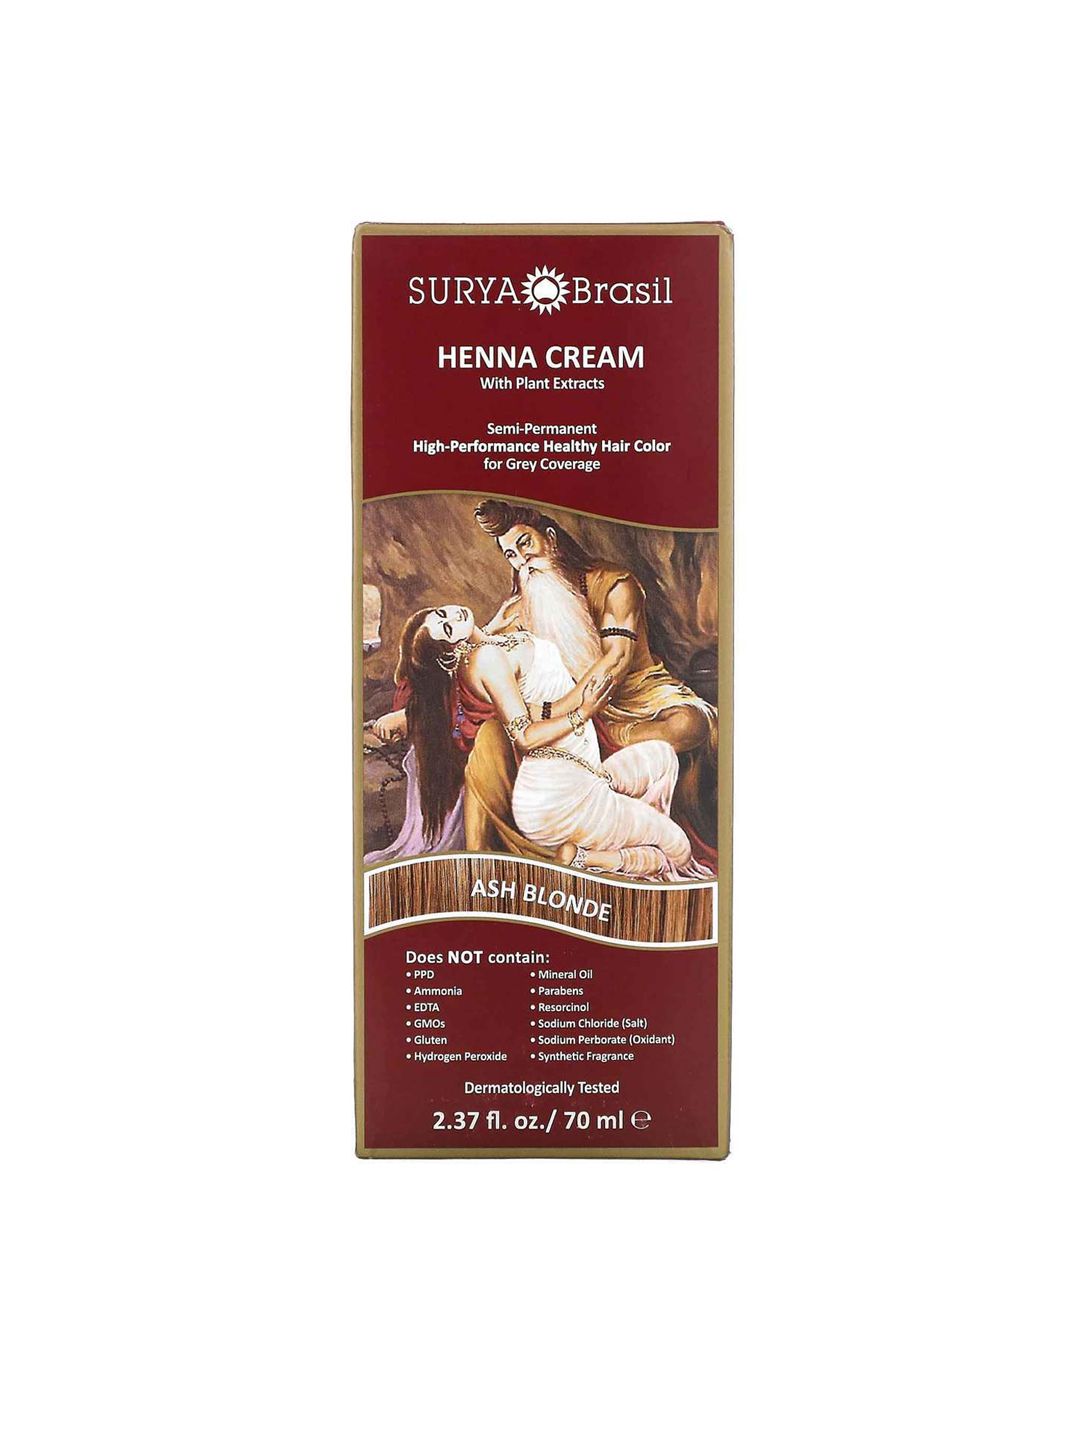 SURYA Brasil Henna Cream Semi-Permanent Hair Color with Plant Extracts 70ml - Ash Blonde Price in India